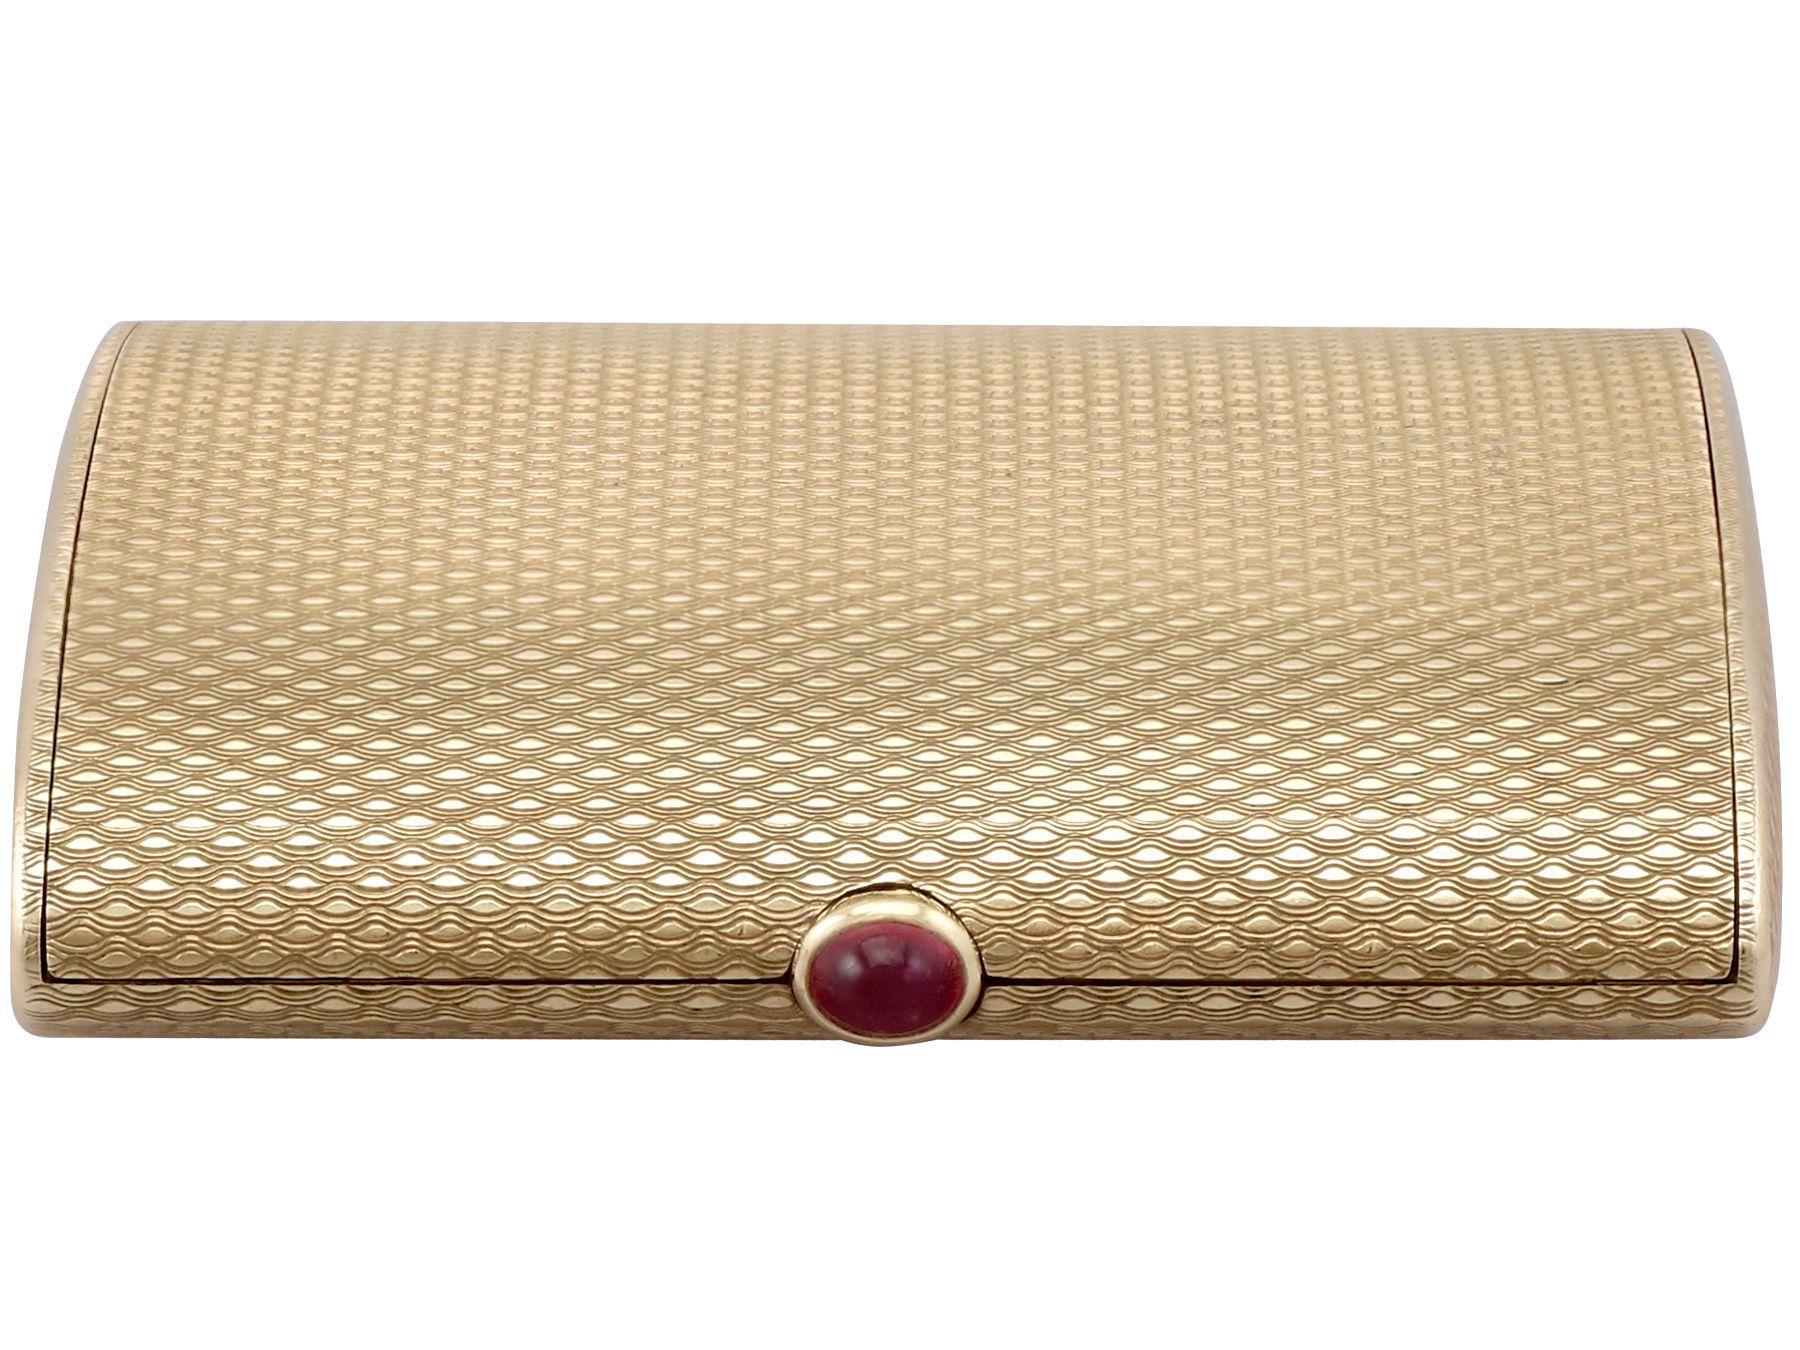 An exceptional, fine and impressive vintage 9 karat yellow gold and 0.86 carat ruby compact made by Boucheron - boxed; an addition to our diverse ornamental collection.

This exceptional vintage 9 karat yellow gold case has a rectangular form, with